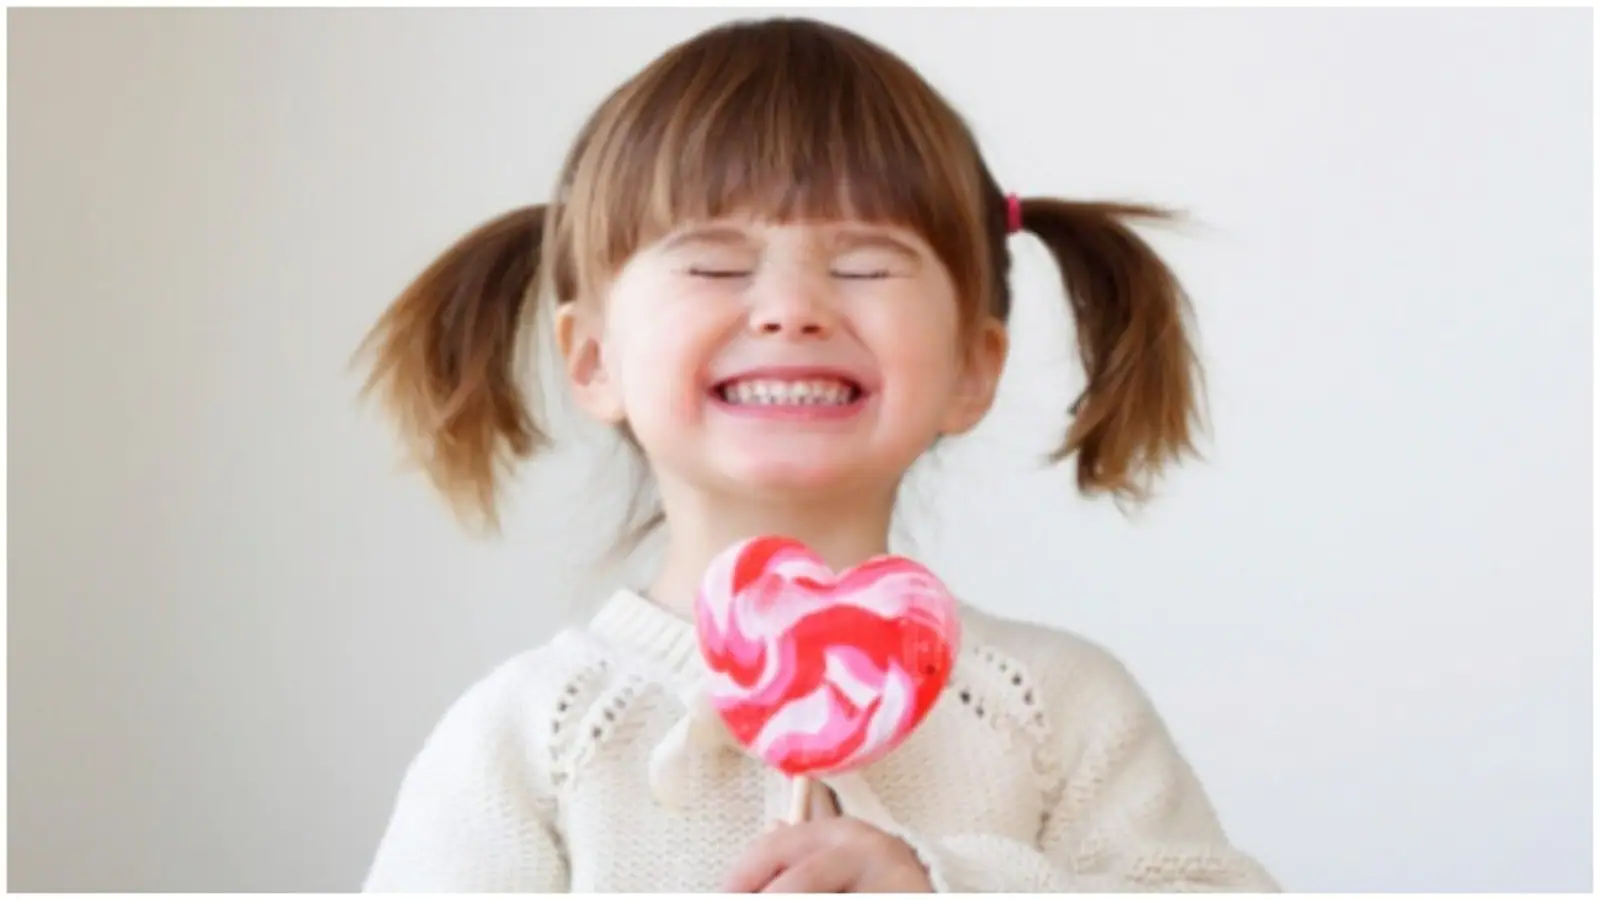 Alternate sweet delicacies for your children: Nutritionist shares tips